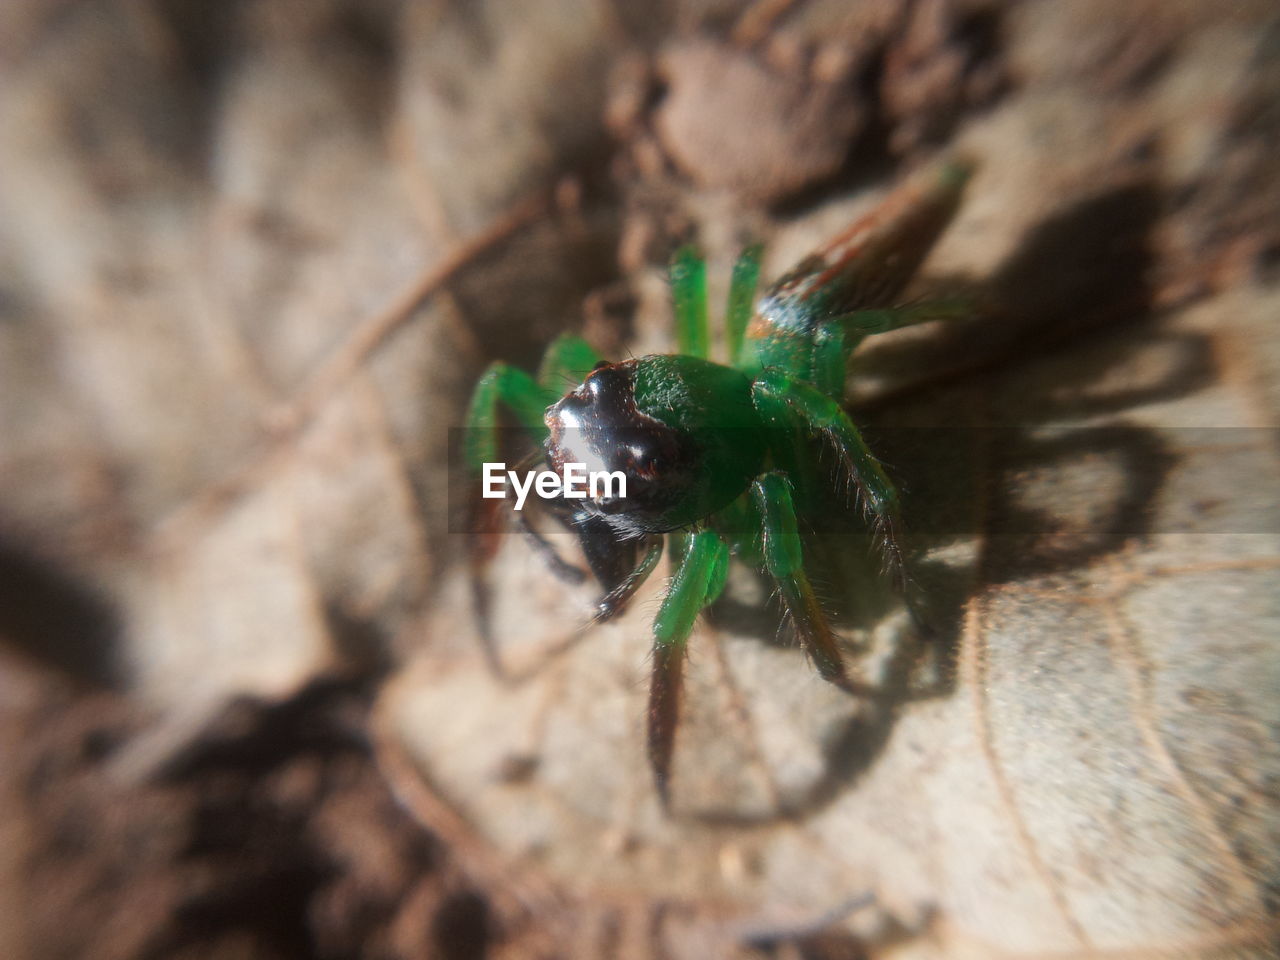 Close-up of green spider on dry leaf